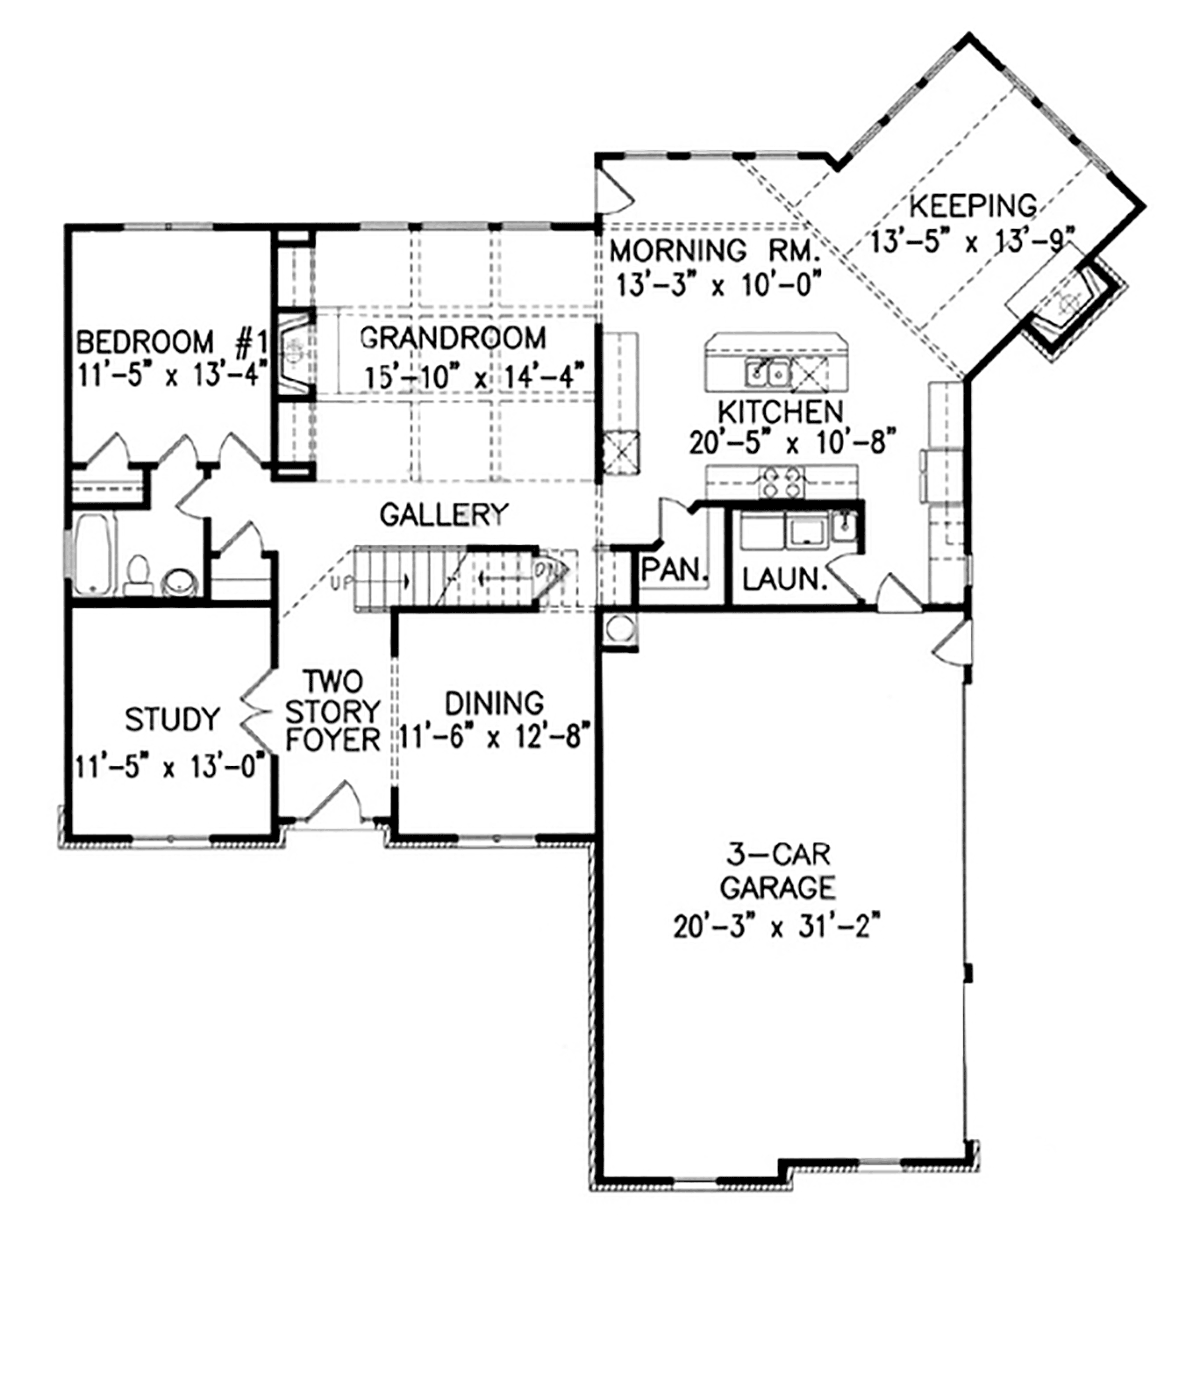 5 Bedroom House Plans Find 5 Bedroom House Plans Today